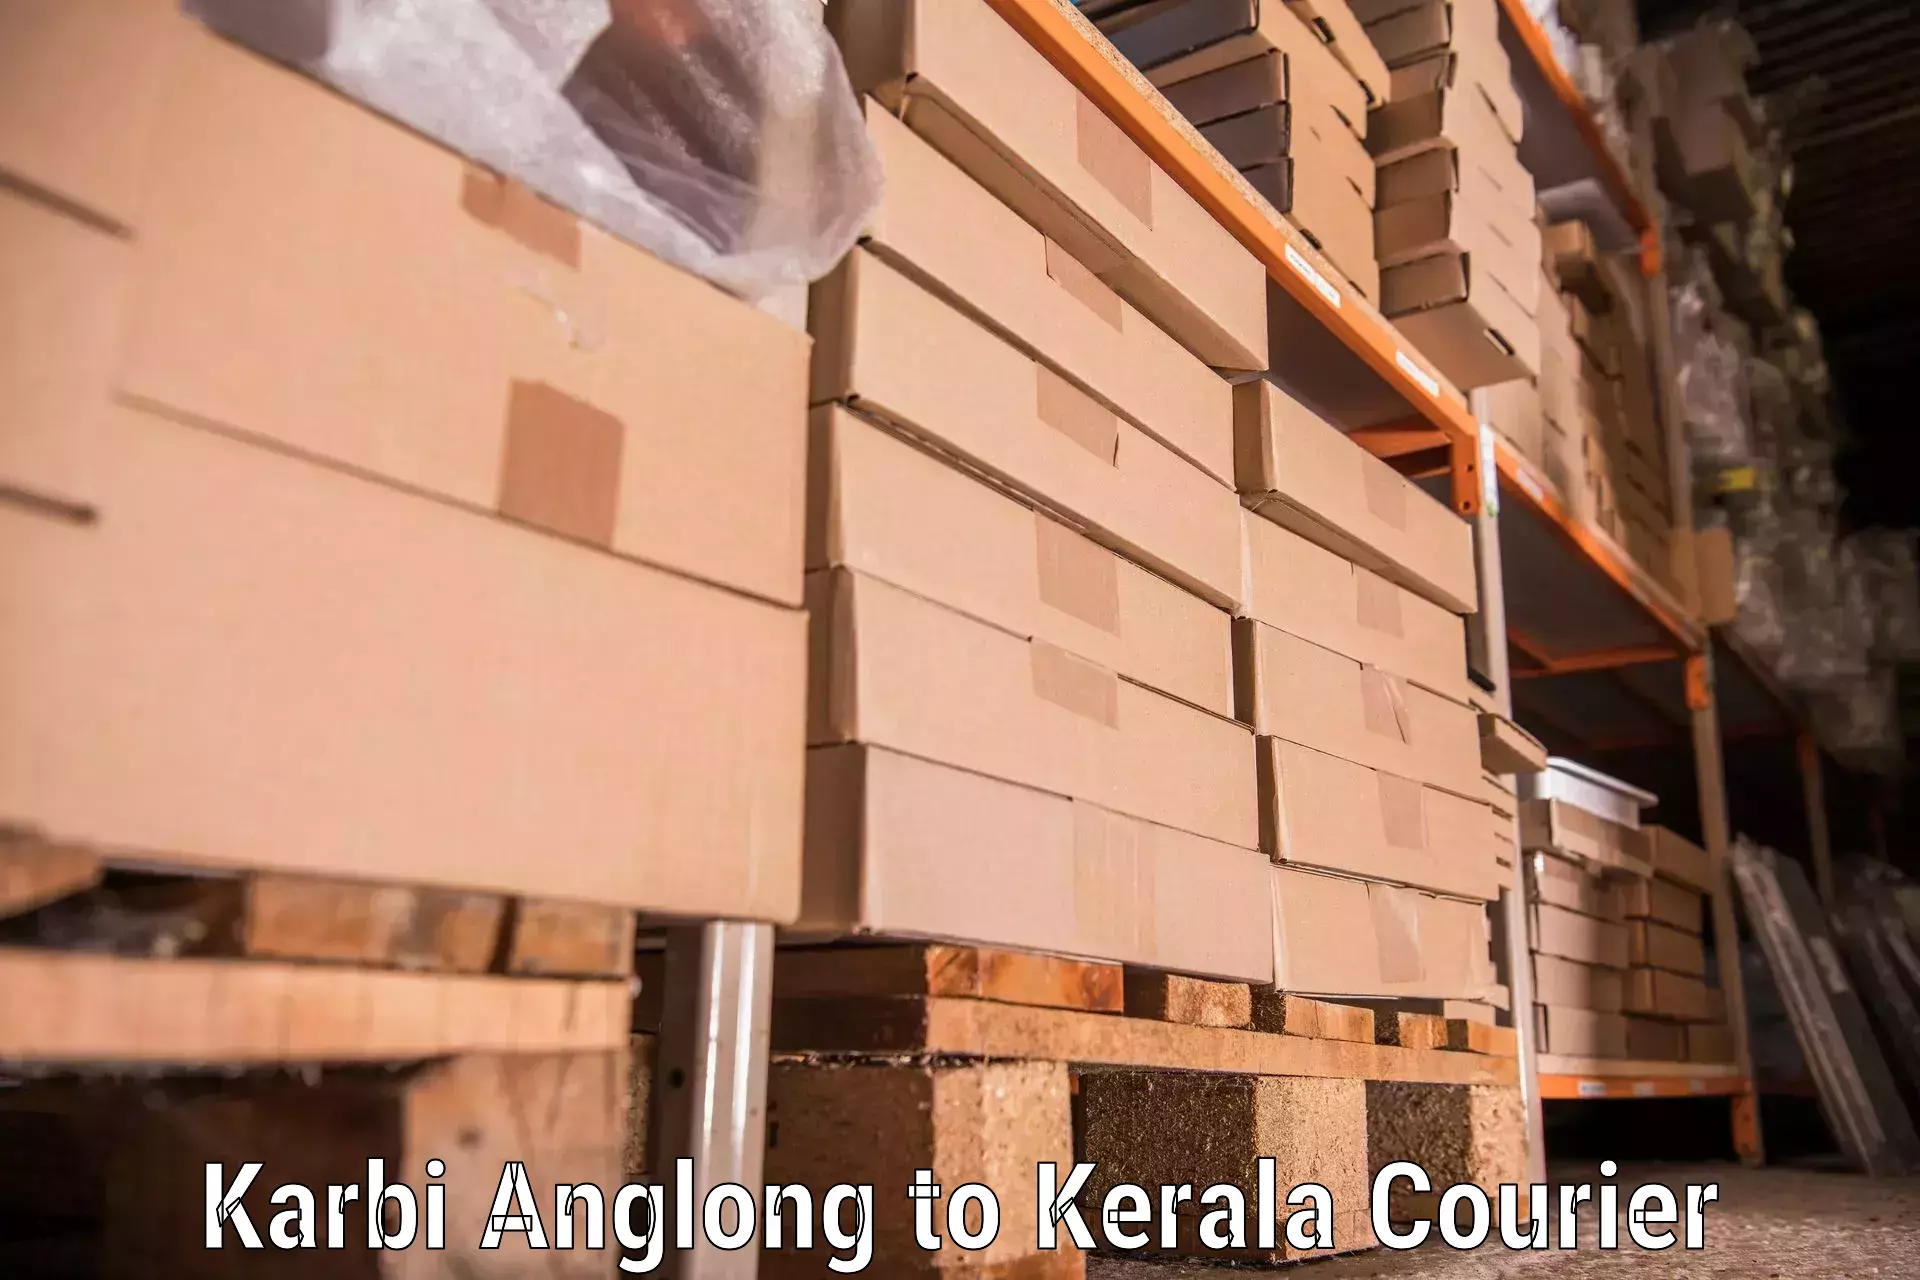 Full-service movers Karbi Anglong to Cochin Port Kochi